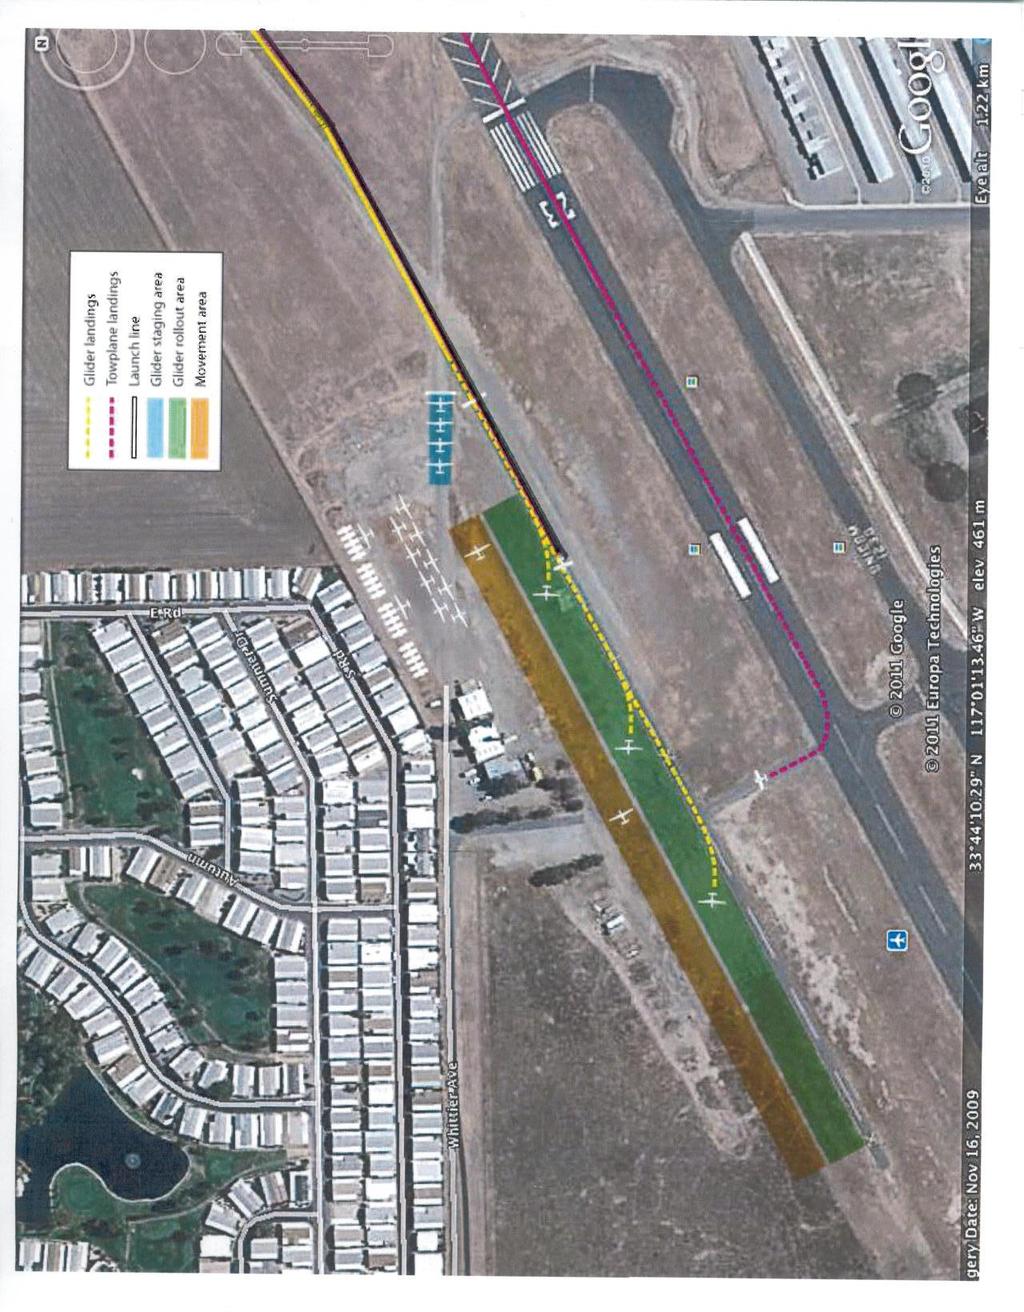 Exhibit A Approved Sailplane Operational Configuration Runway 4-22 will be utilized for all sailplane take-off and landing operations as shown on the exhibit.